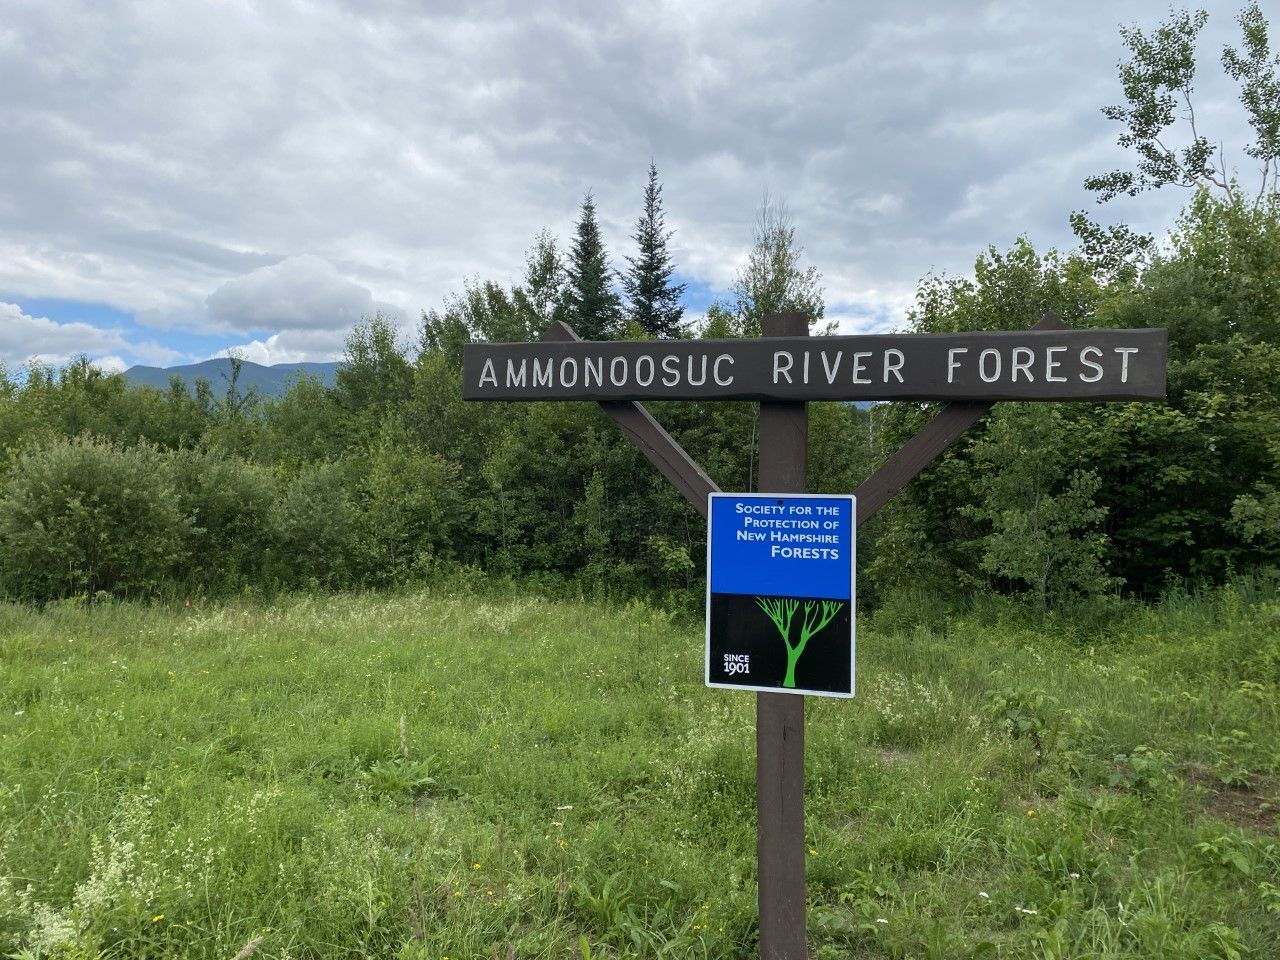 A property sign for Ammonoosuc River Forest with the Forest Society's logo.